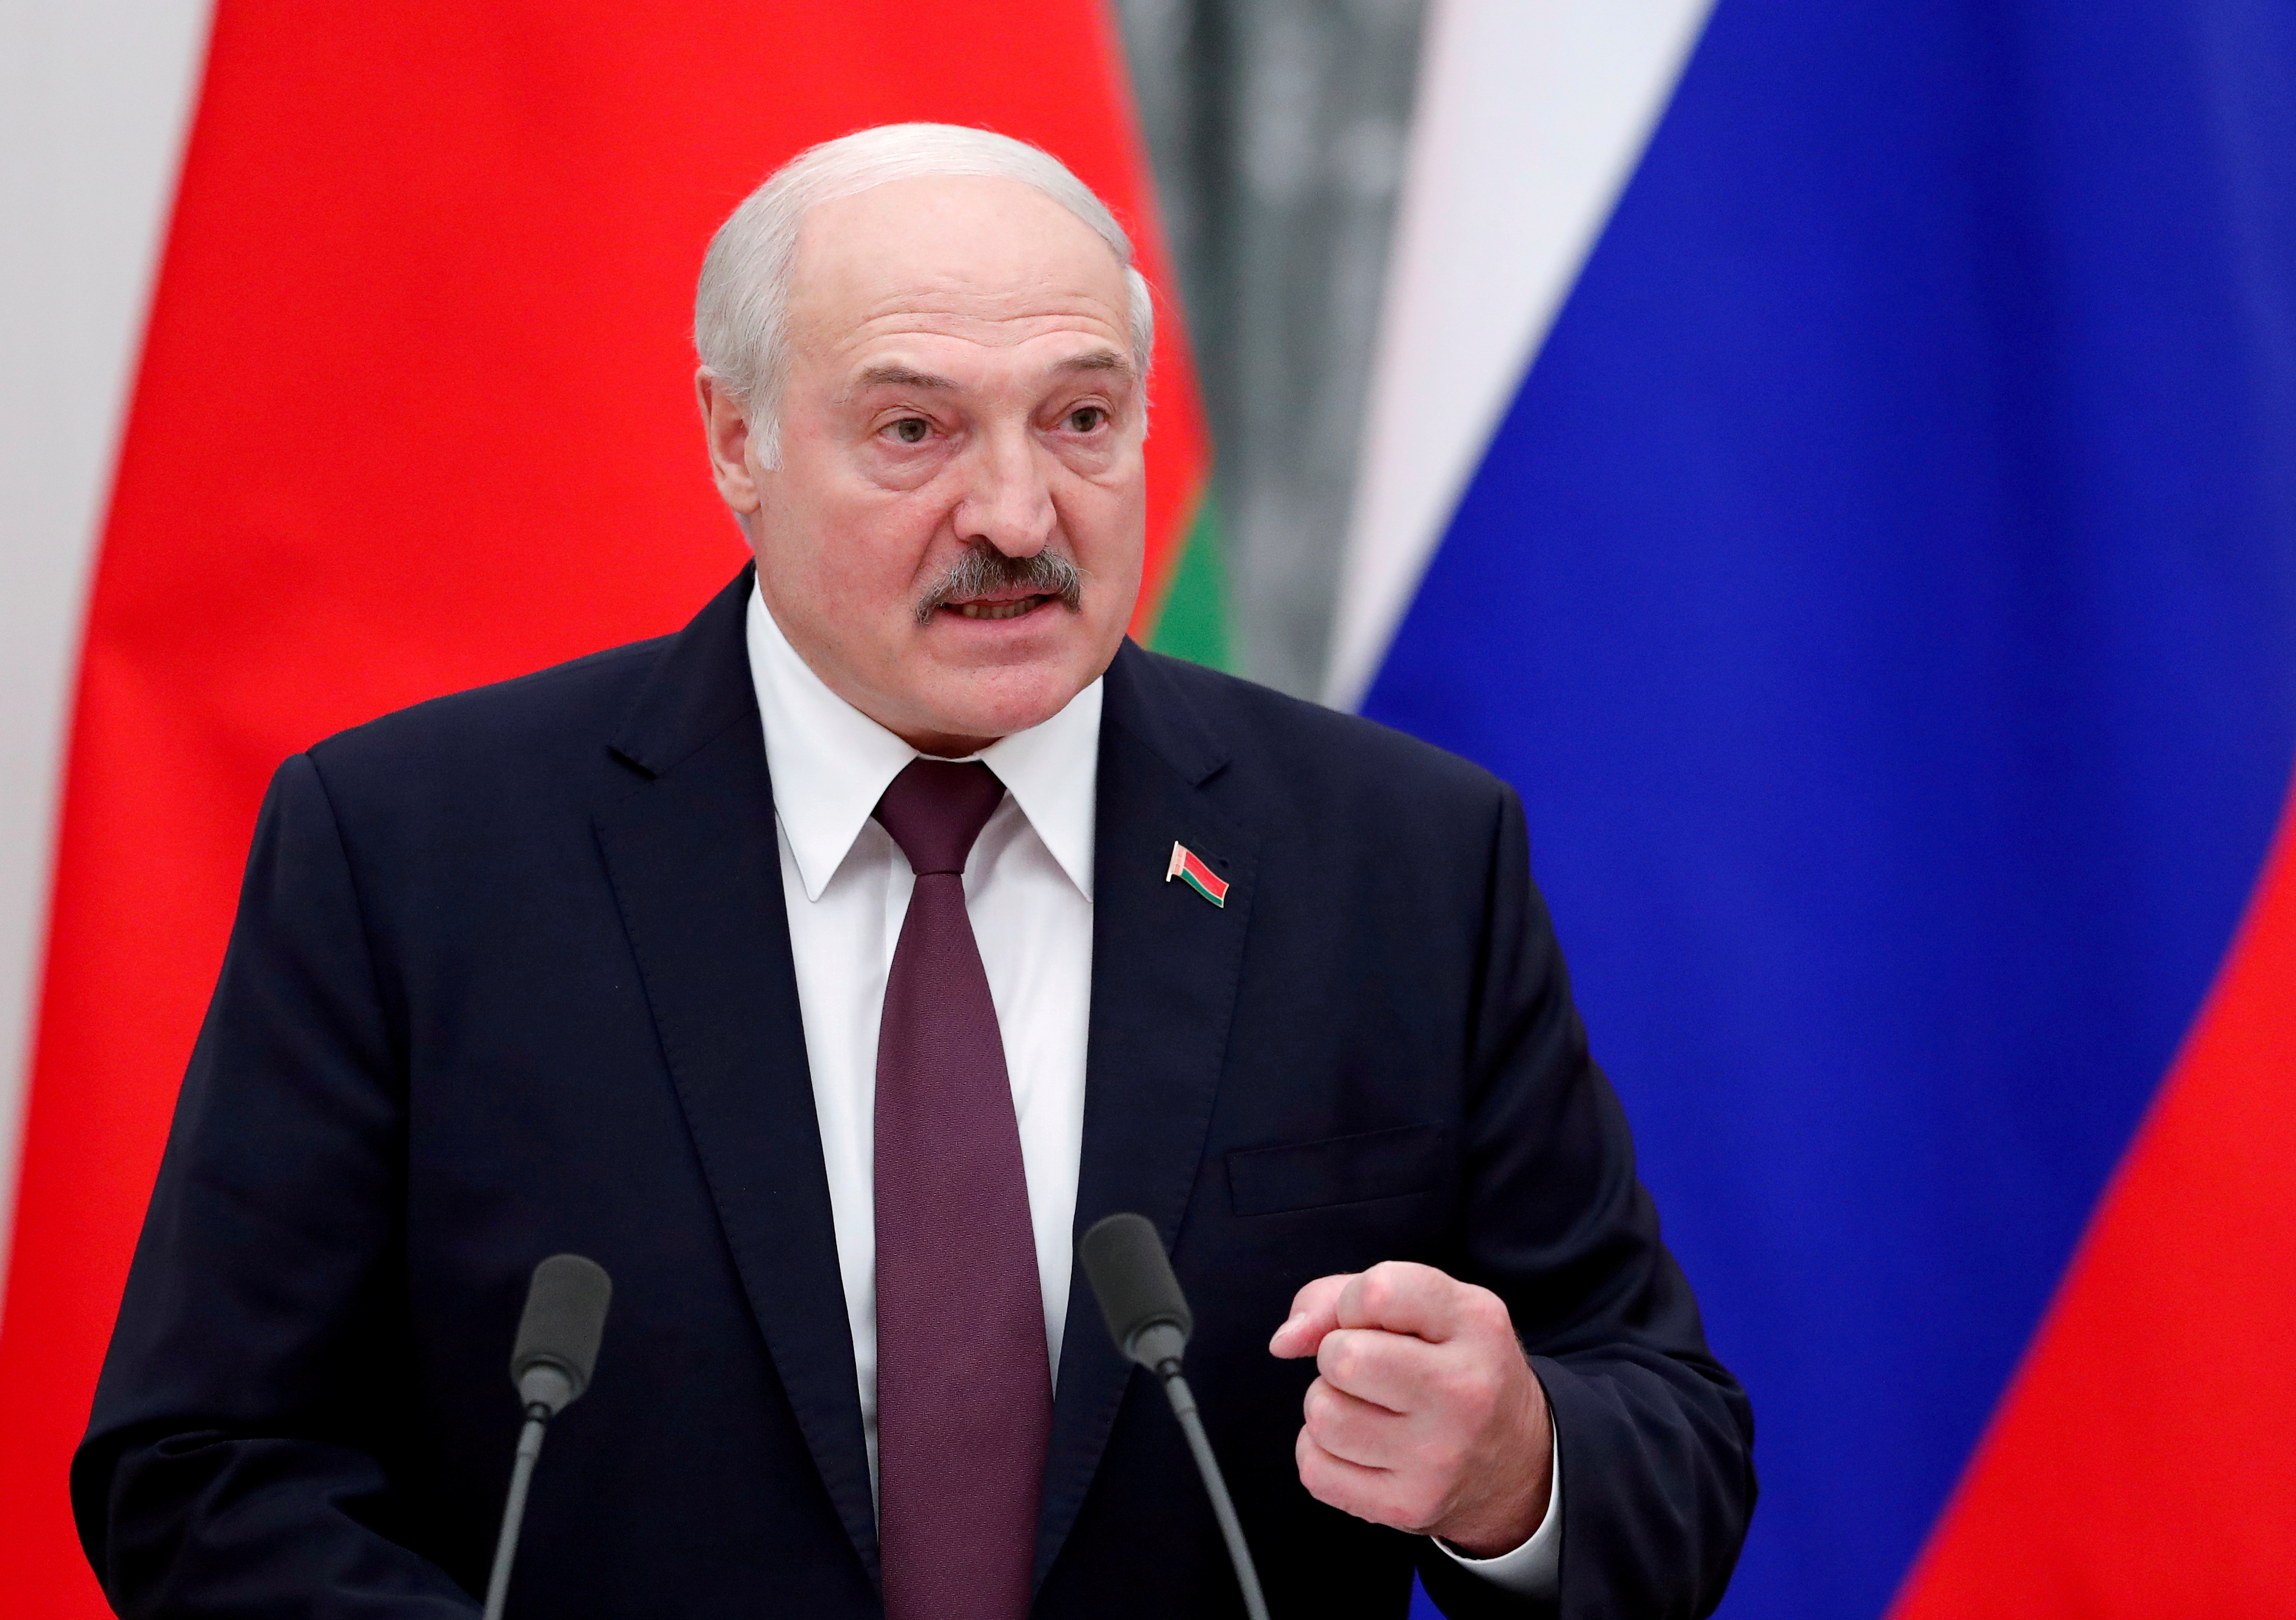 Belarusian President Alexander Lukashenko speaks during a news conference at the Kremlin in Moscow, Russia September 9, 2021. REUTERS/Shamil Zhumatov/File Photo